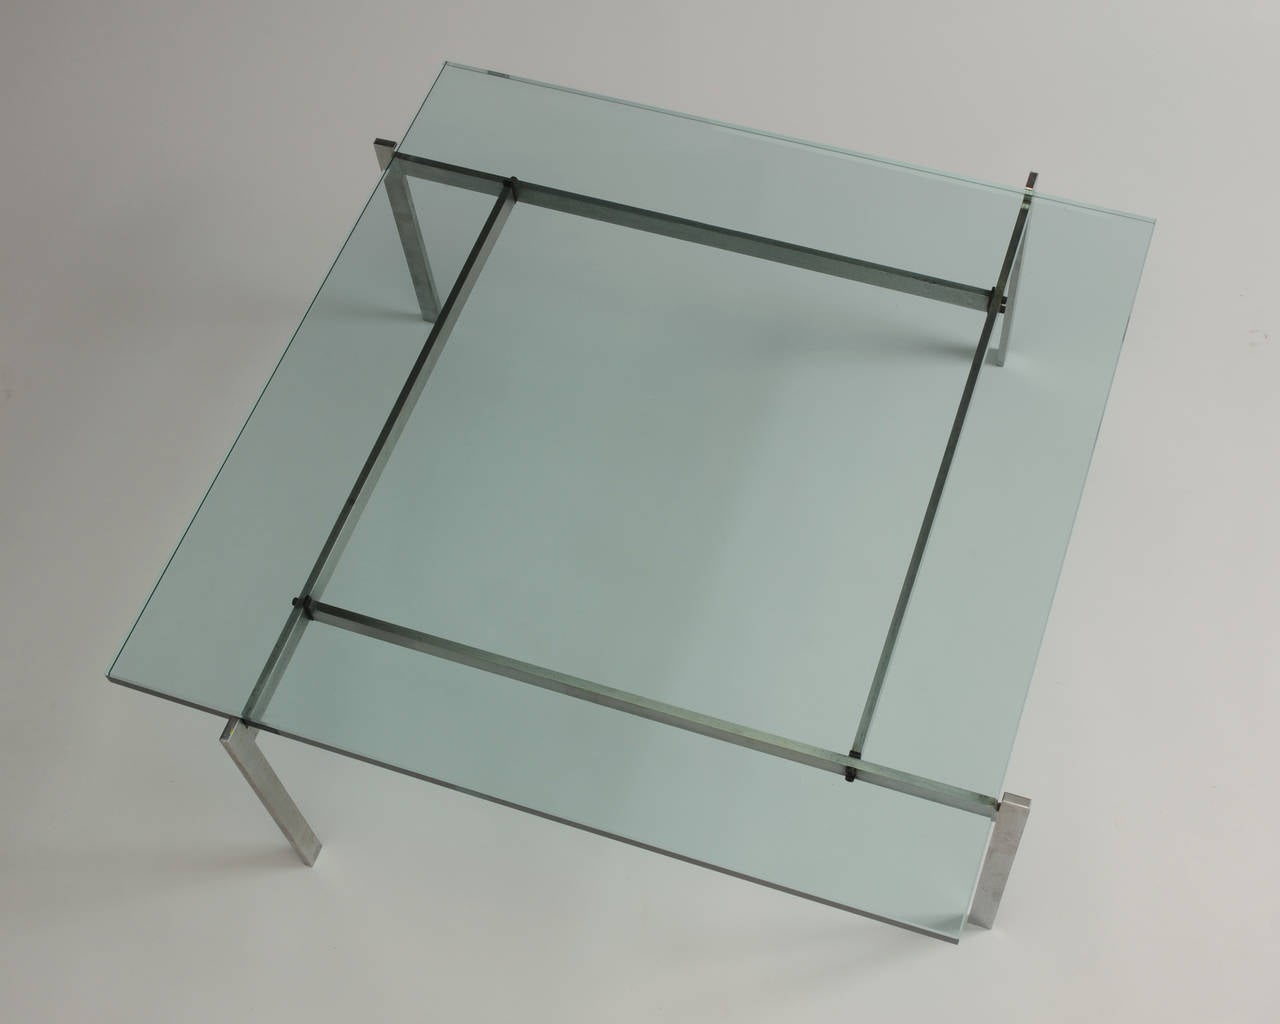 Manufactured by E. Kold Christensen, Denmark in the early 1960s, the table has a satin steel frame with a glass top.
Marked on the satin steel frame; Poul Kjaerholm PK 61 coffee table with Provenance from a Princeton University Professor available